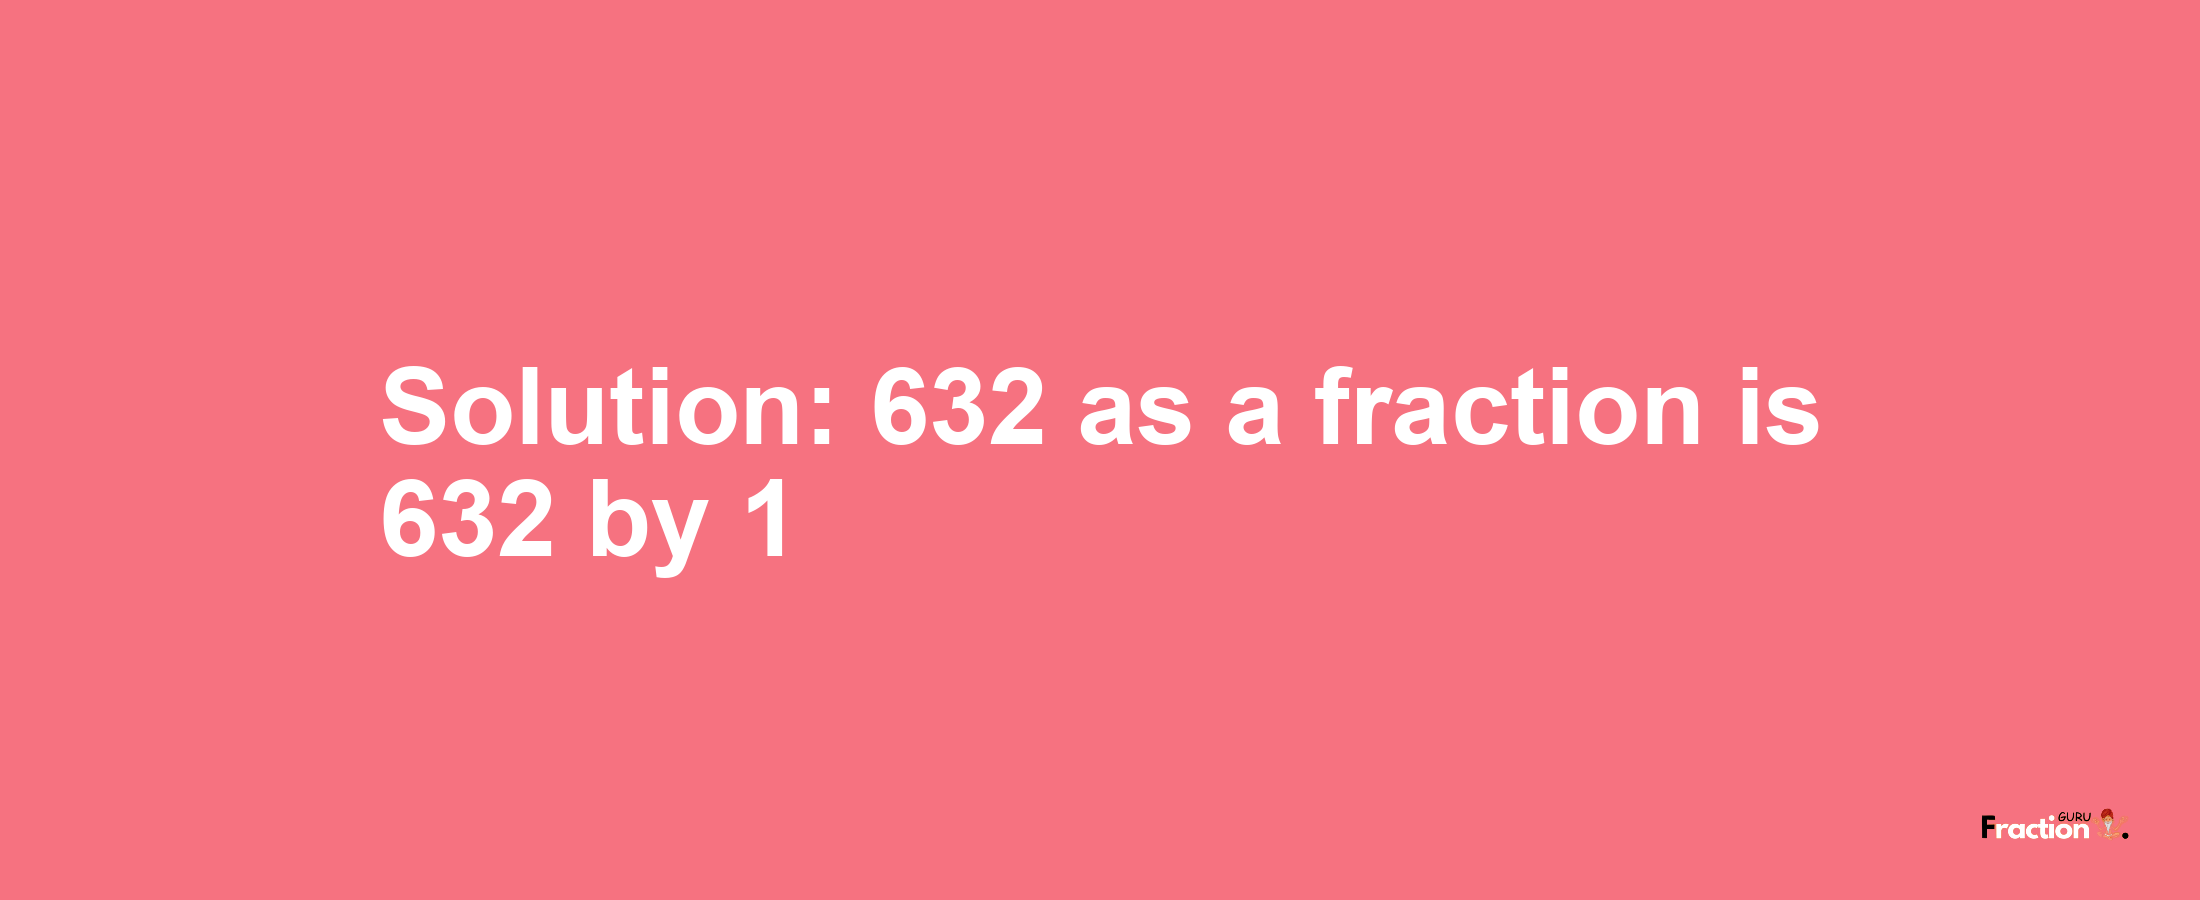 Solution:632 as a fraction is 632/1